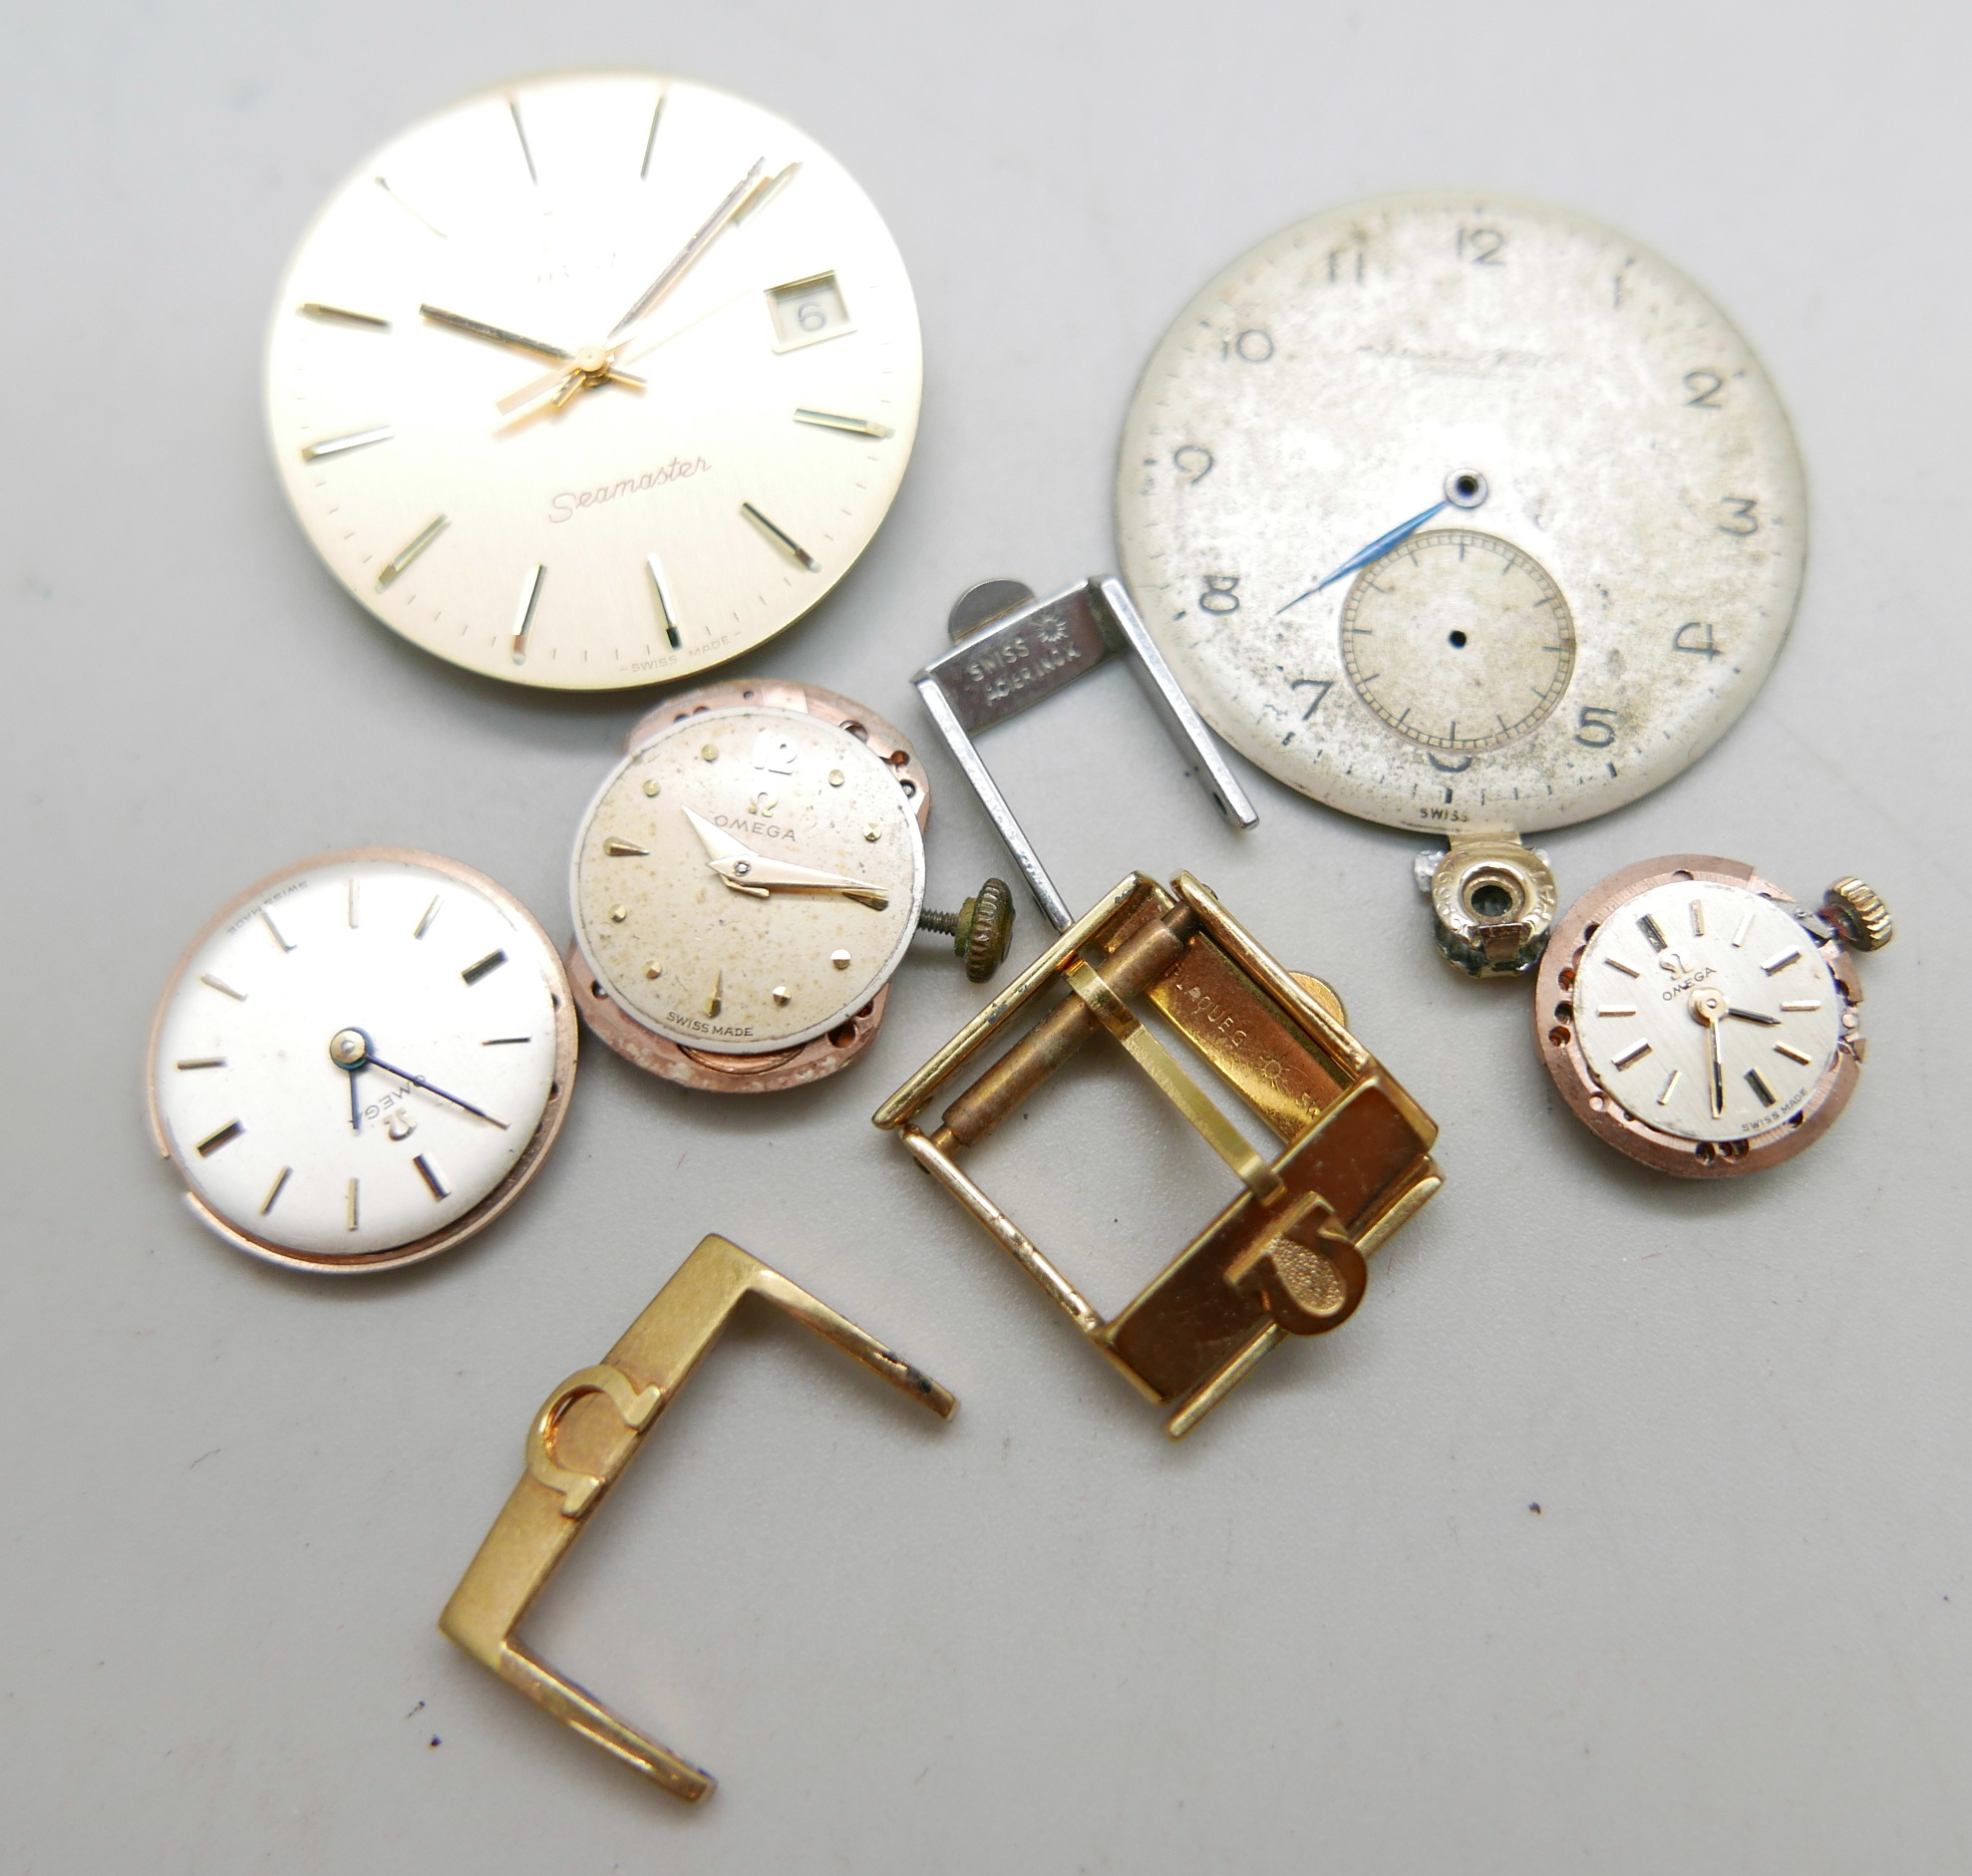 Four Omega strap buckles, an International Watch Company watch dial, three lady's Omega watch